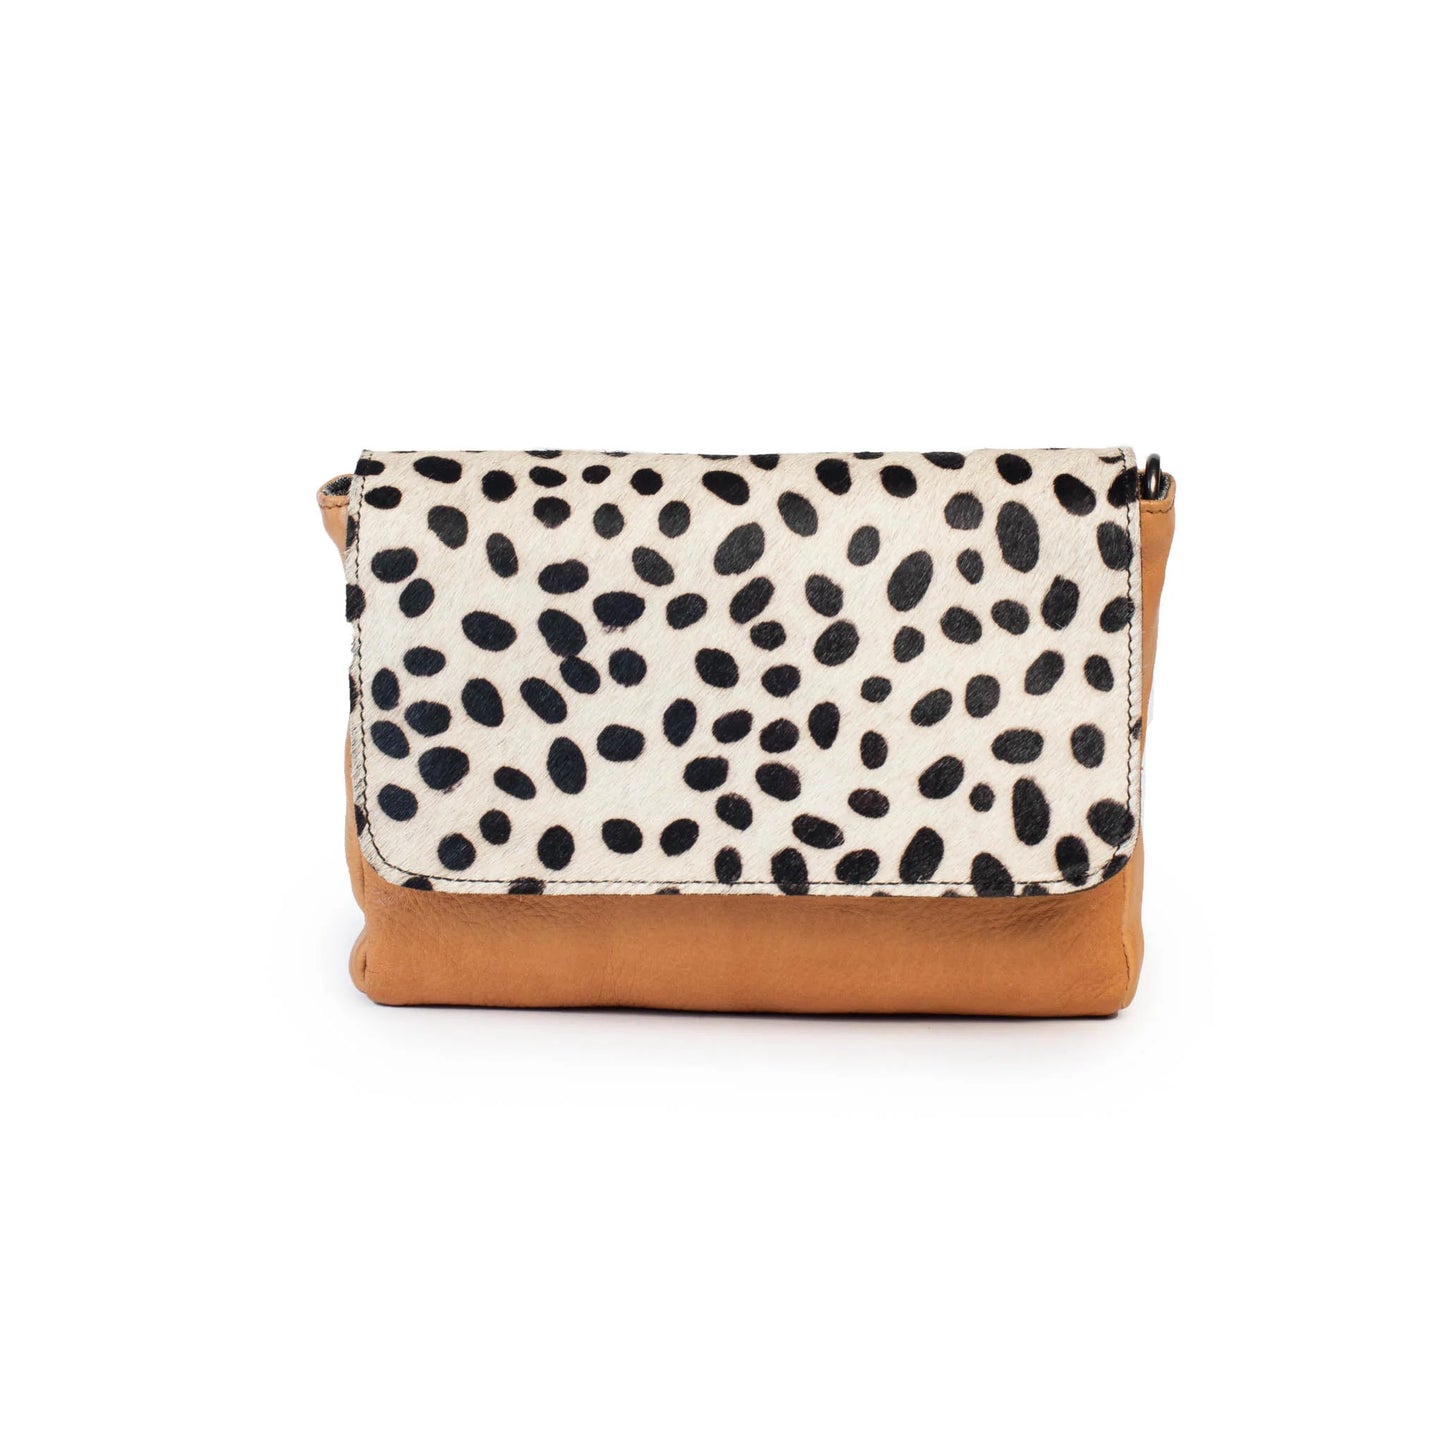 Load image into Gallery viewer, Dusky Robin Leather Sara Bag - Tan/Spot
